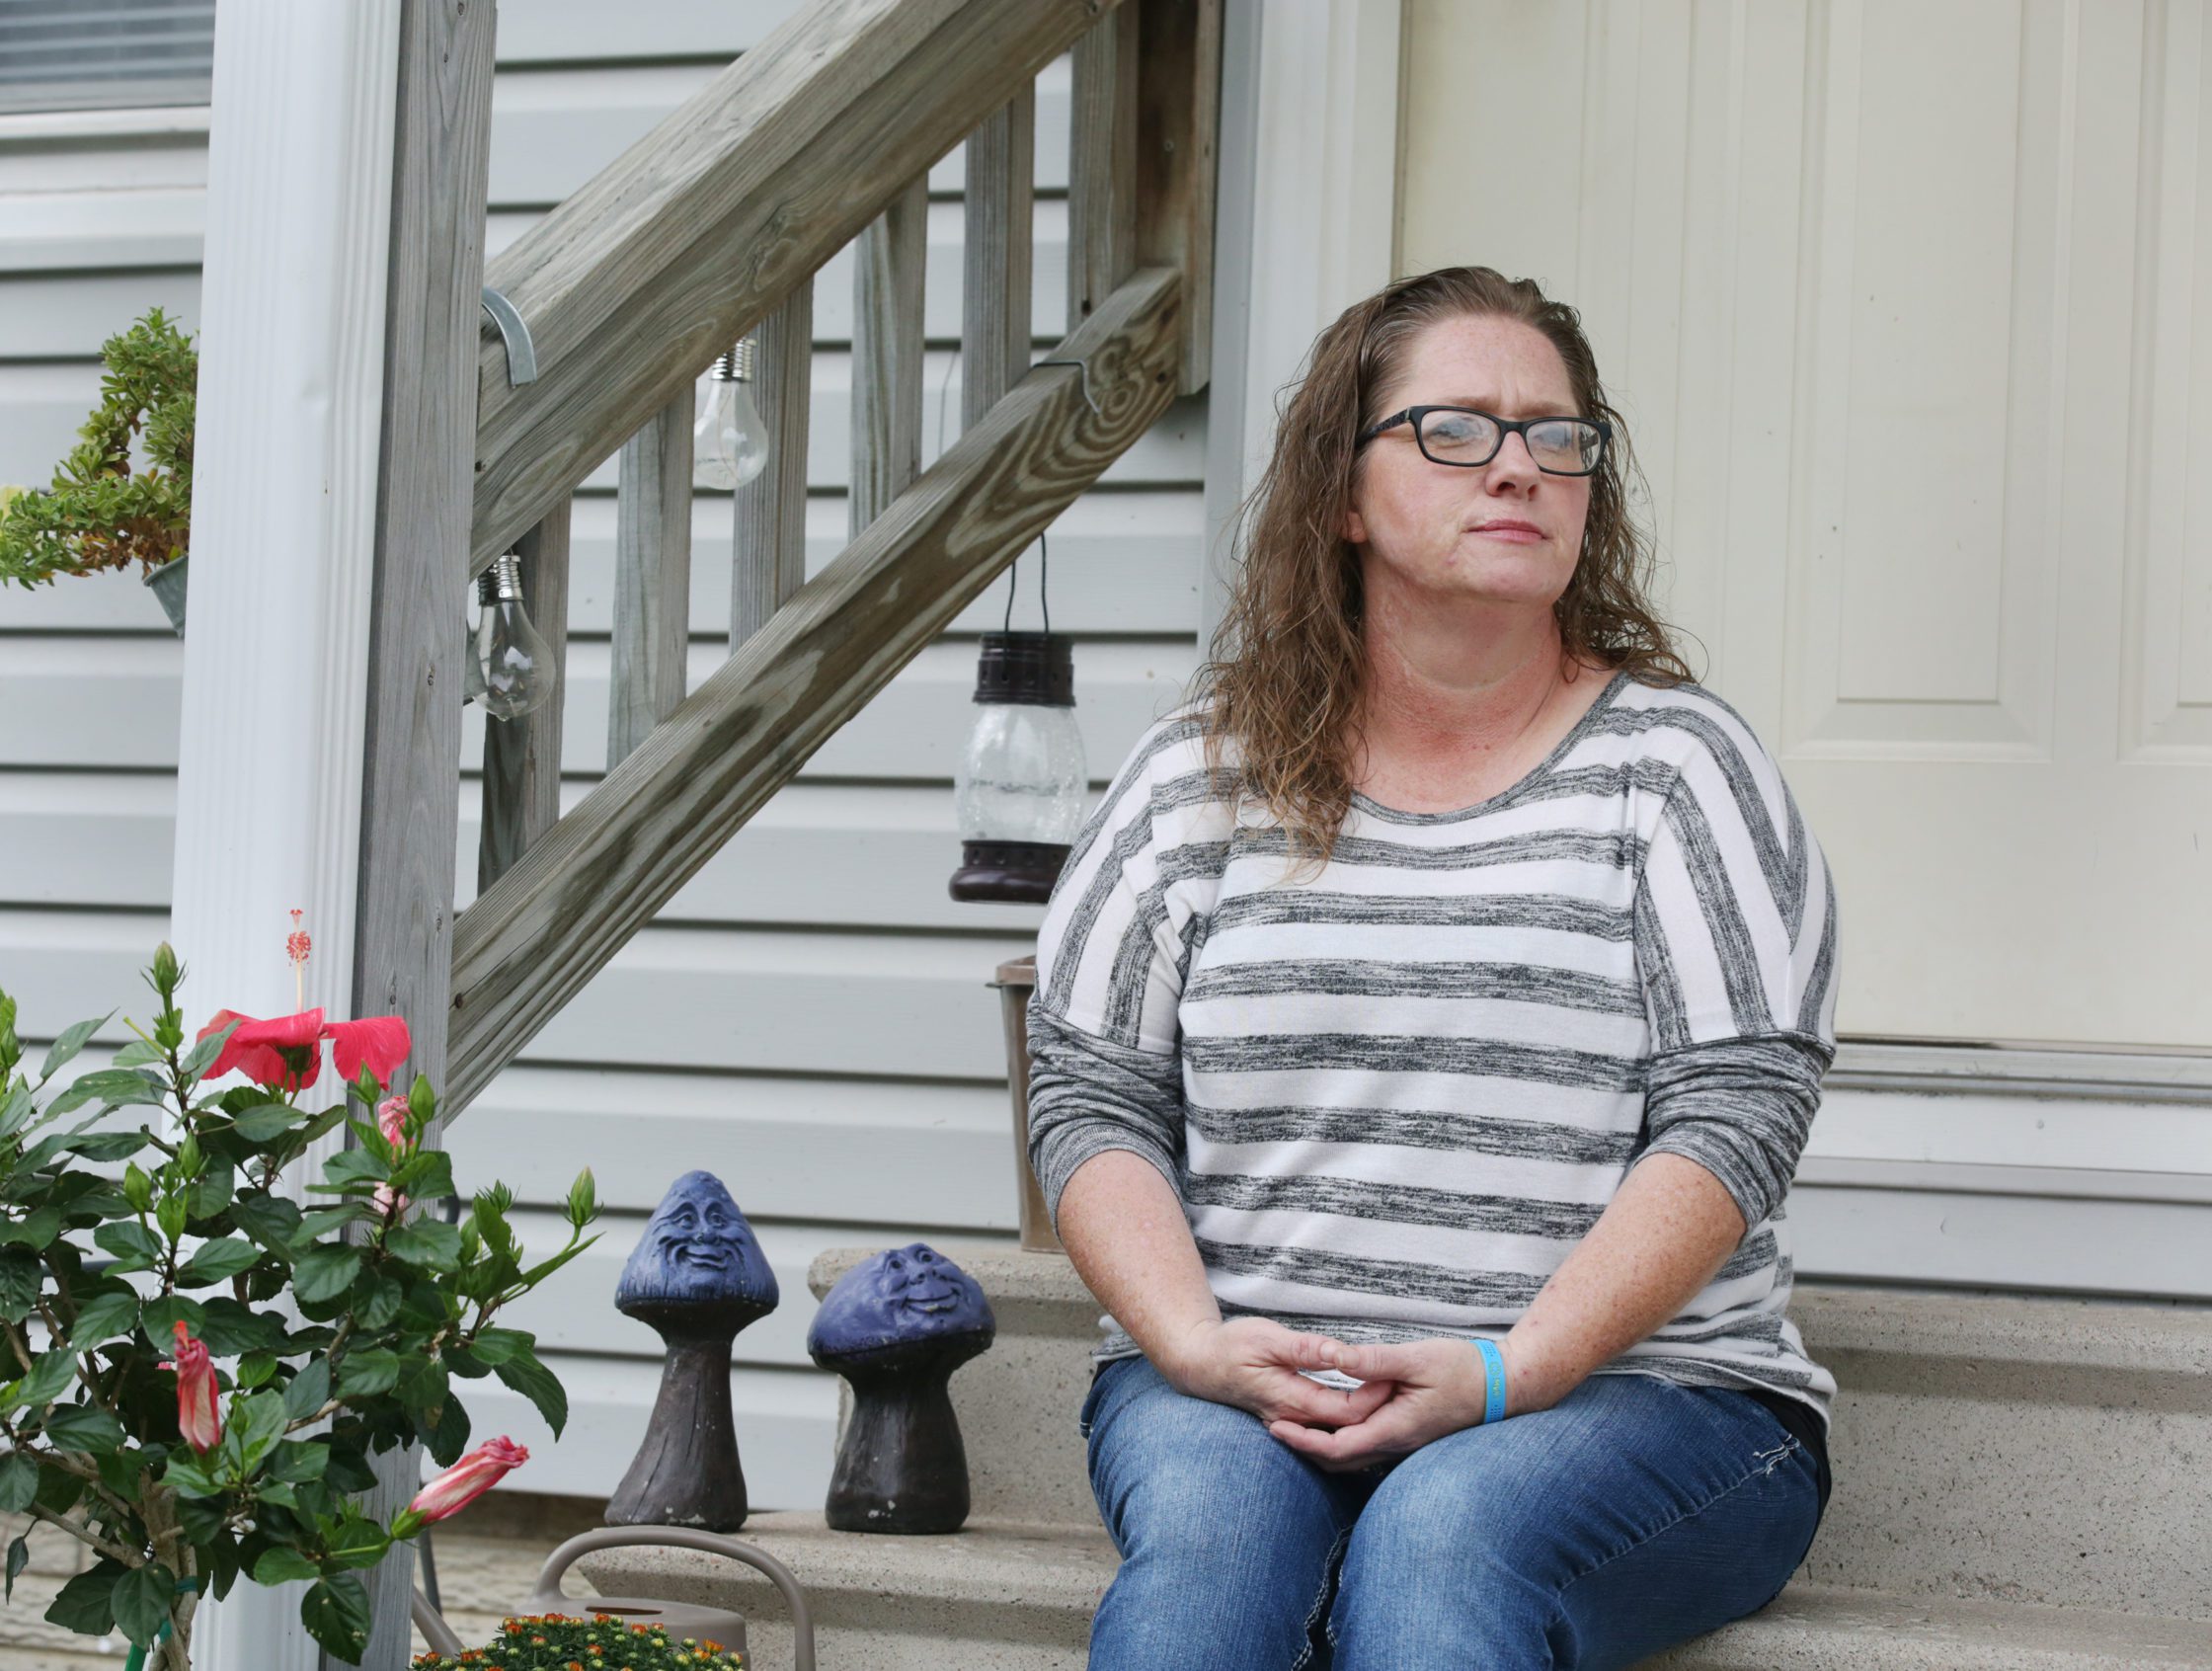 Alison Reents is shown Thursday, Aug. 26 outside at her home in Hastings.